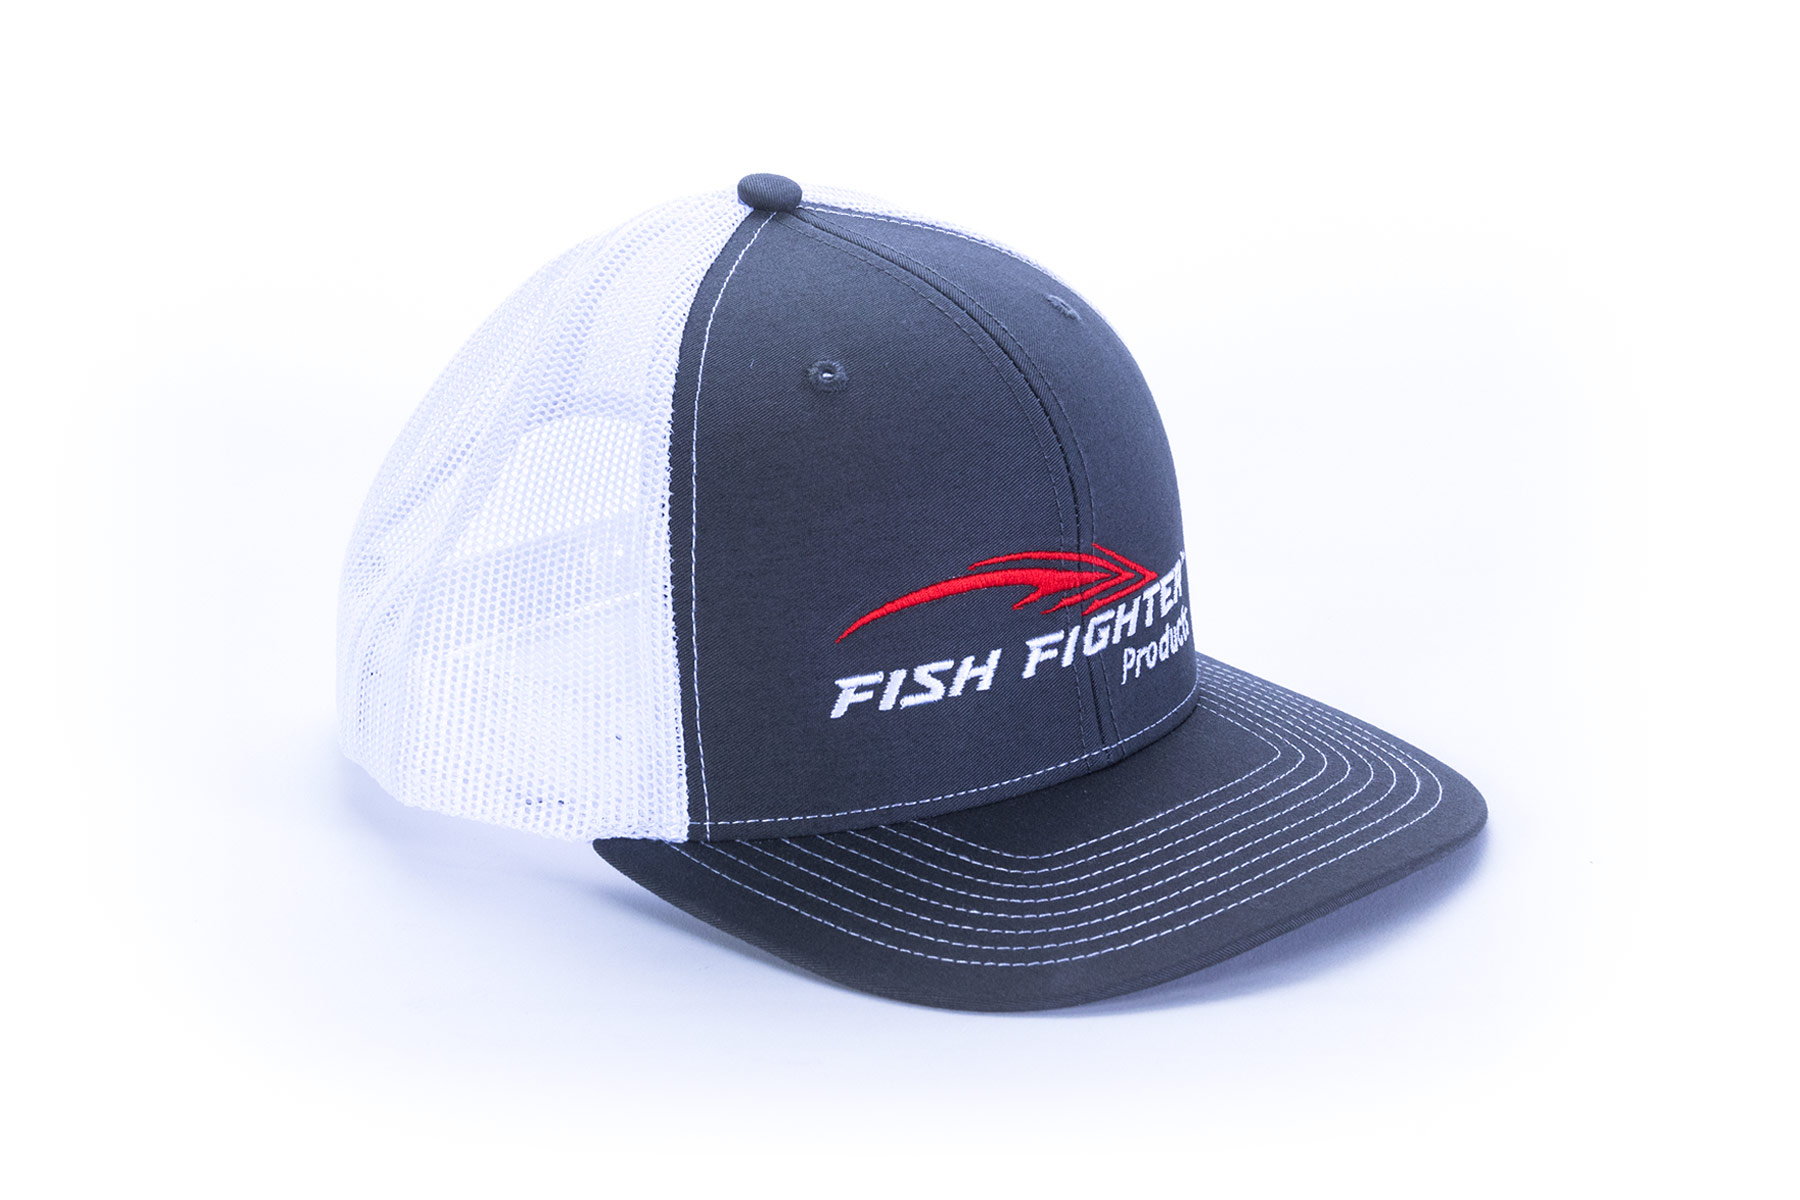 Snapback Hat (Gray with White Mesh) - Fish Fighter® Products